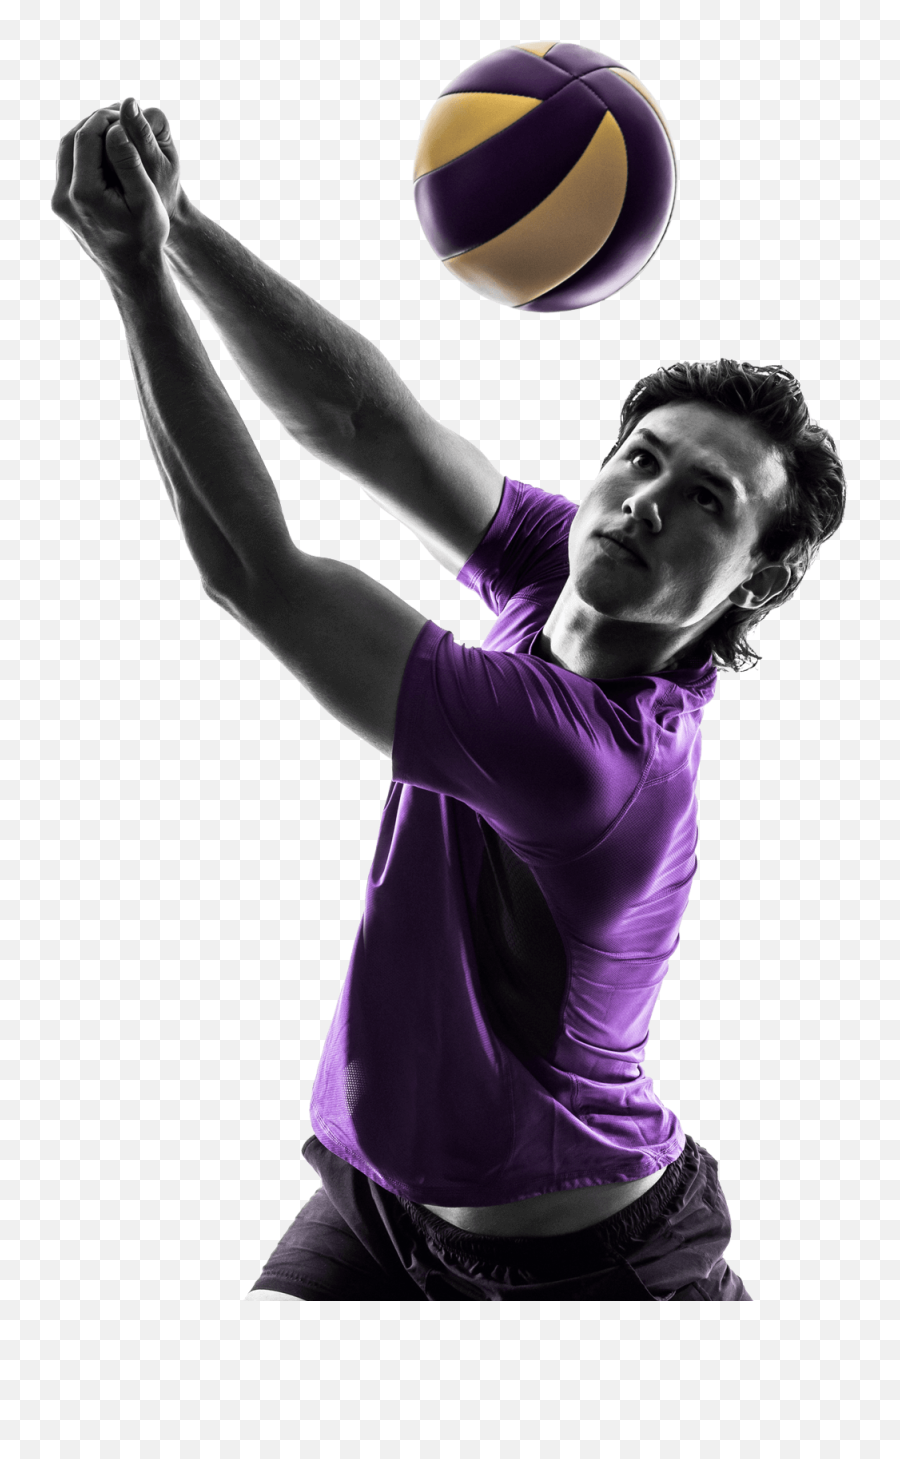 Download Volleyball - Male Volleyball Player Png Full Size Transparent Png Image Volleyball Player Png,Volleyball Png